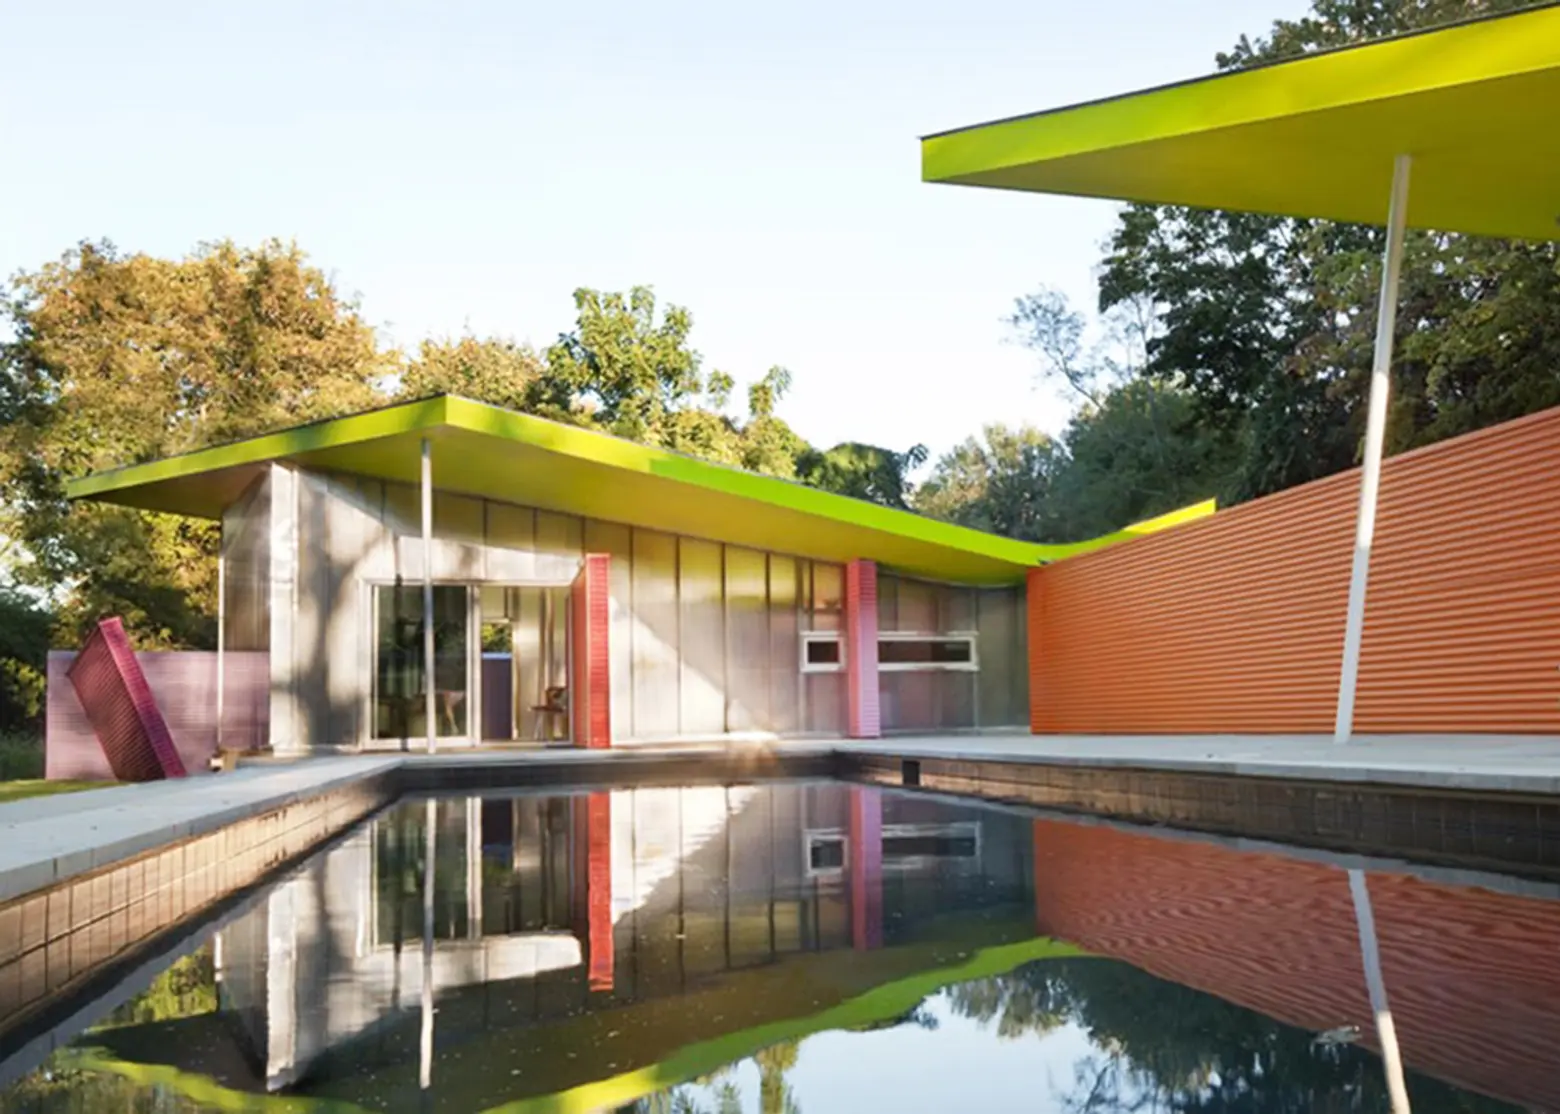 colorful home, Shelter Island Pavilion, Mies van der Rohe’s Barcelona Pavilion, Stamberg Aferiat, polycarbonate walls, passive house, geothermal energy, Shelter Island